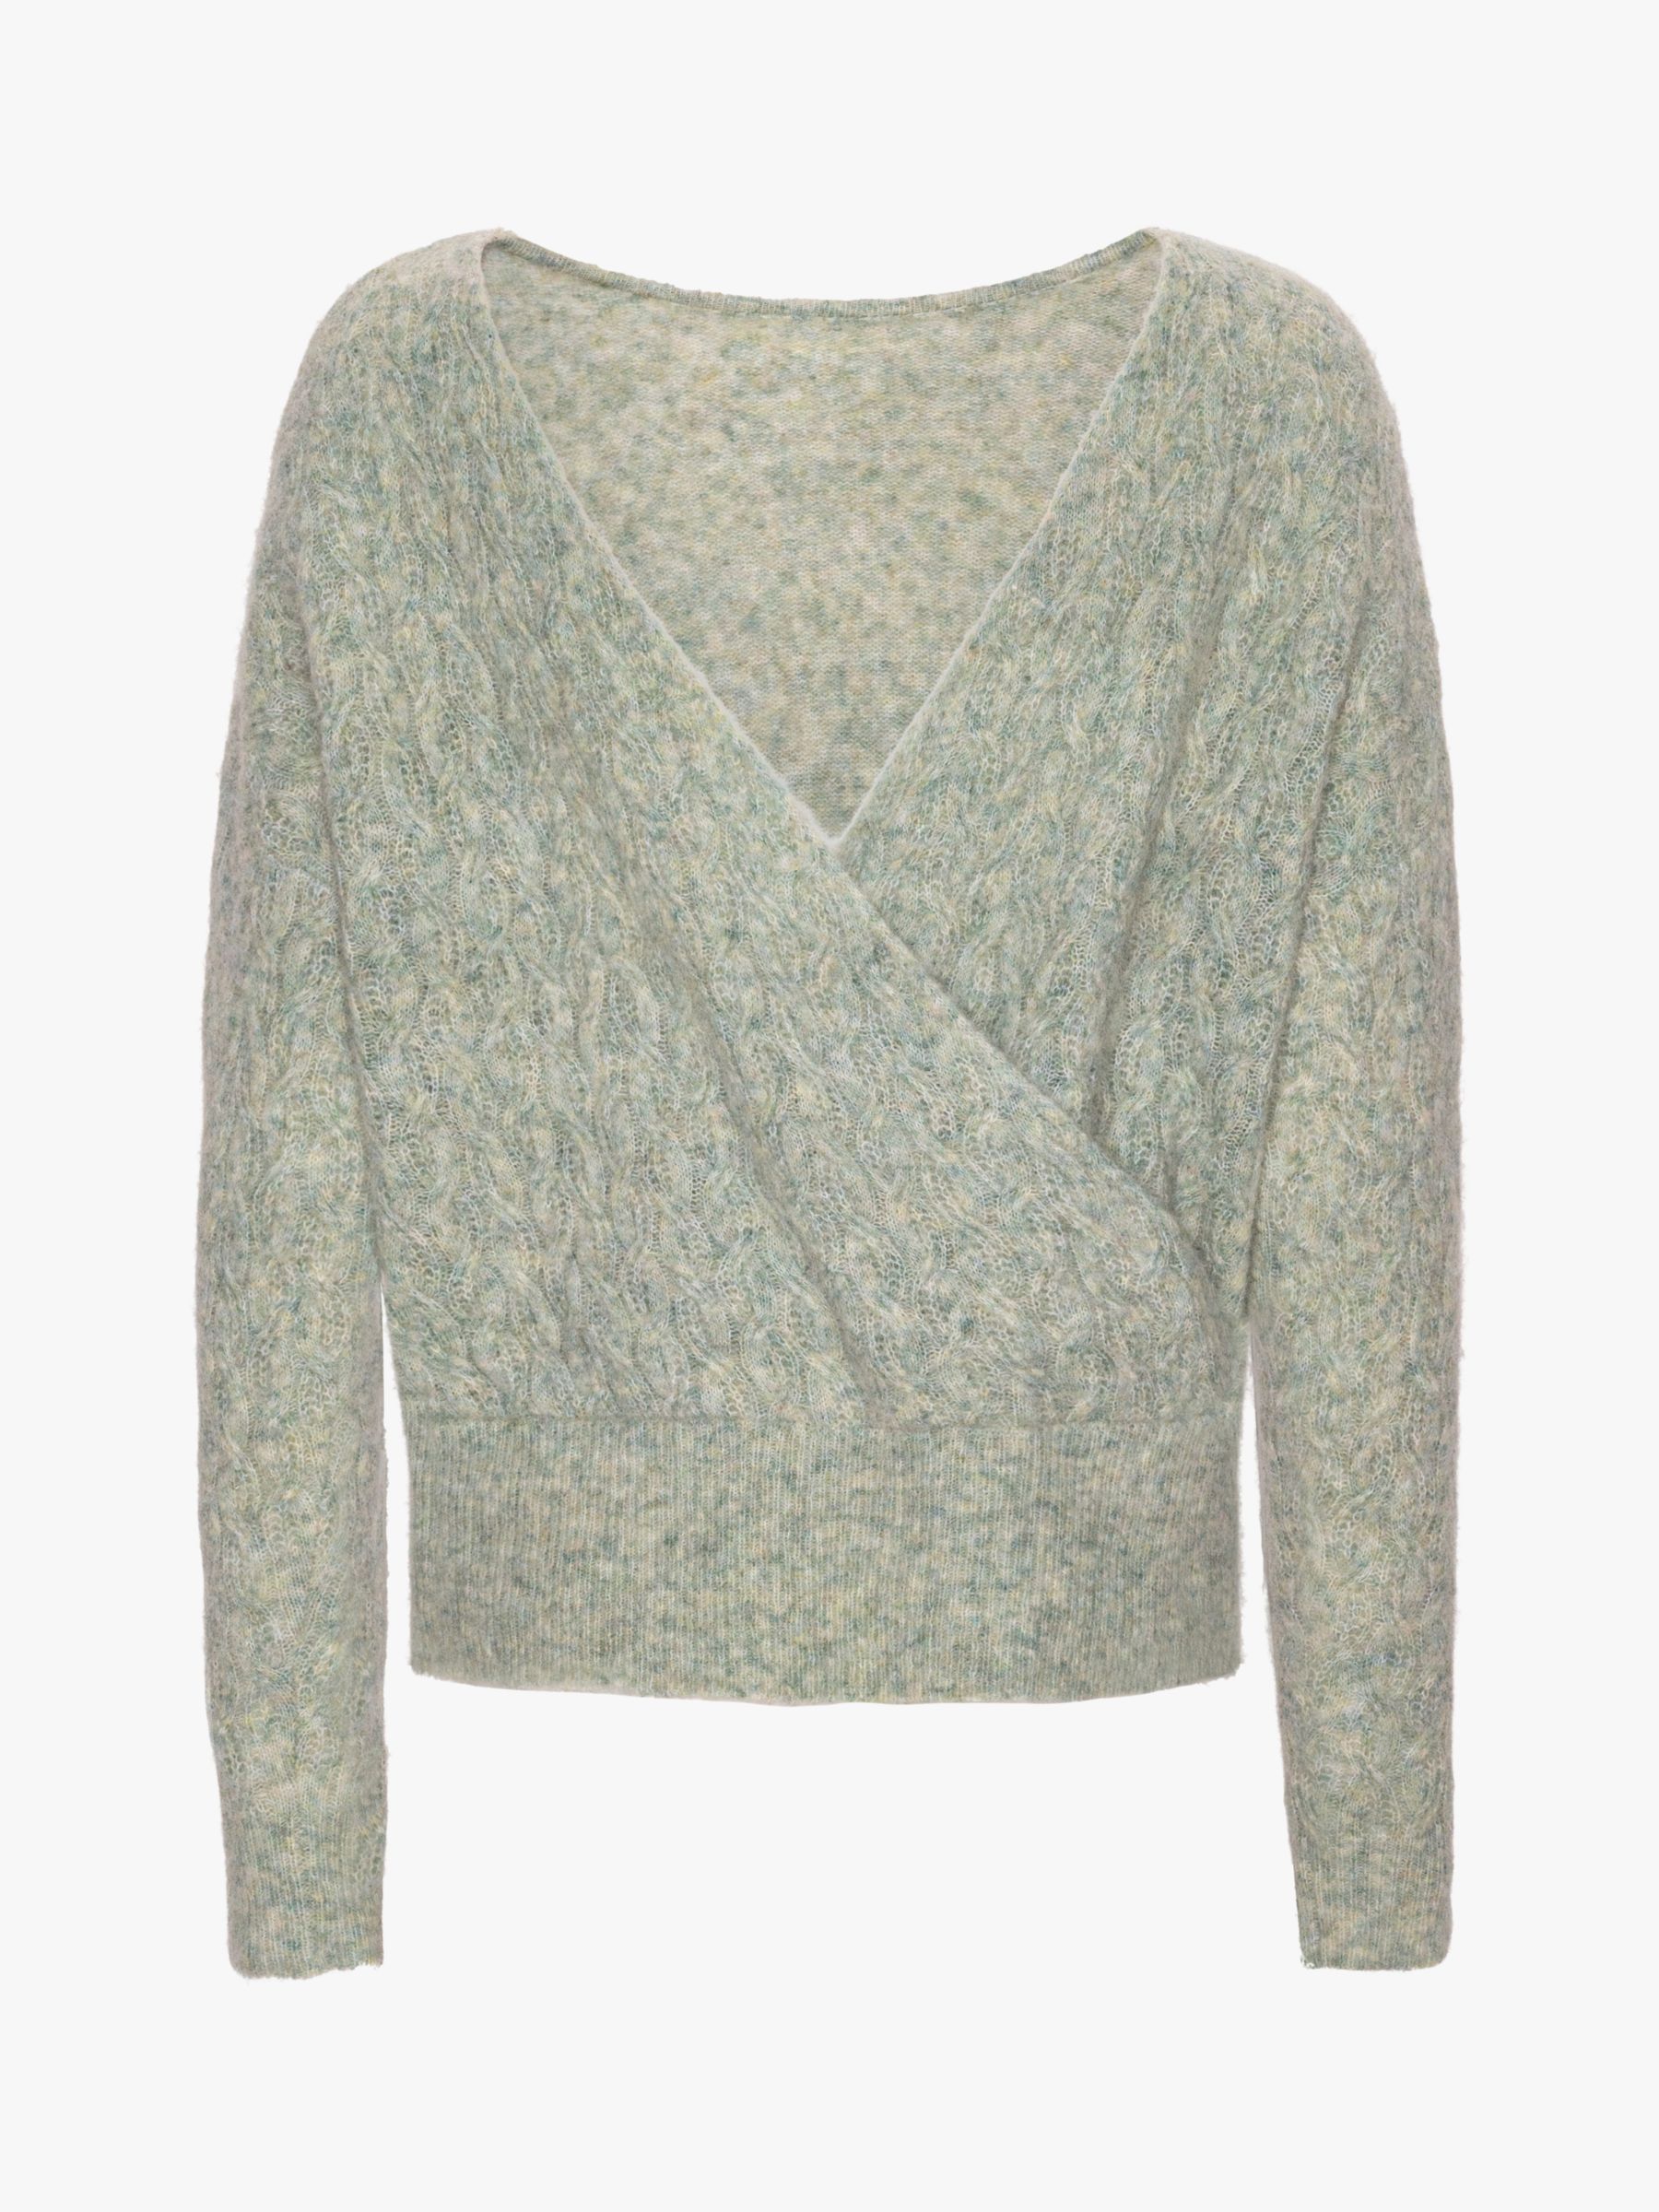 A-VIEW Filippa Knitted Reversible Jumper, Dusty Mint, S